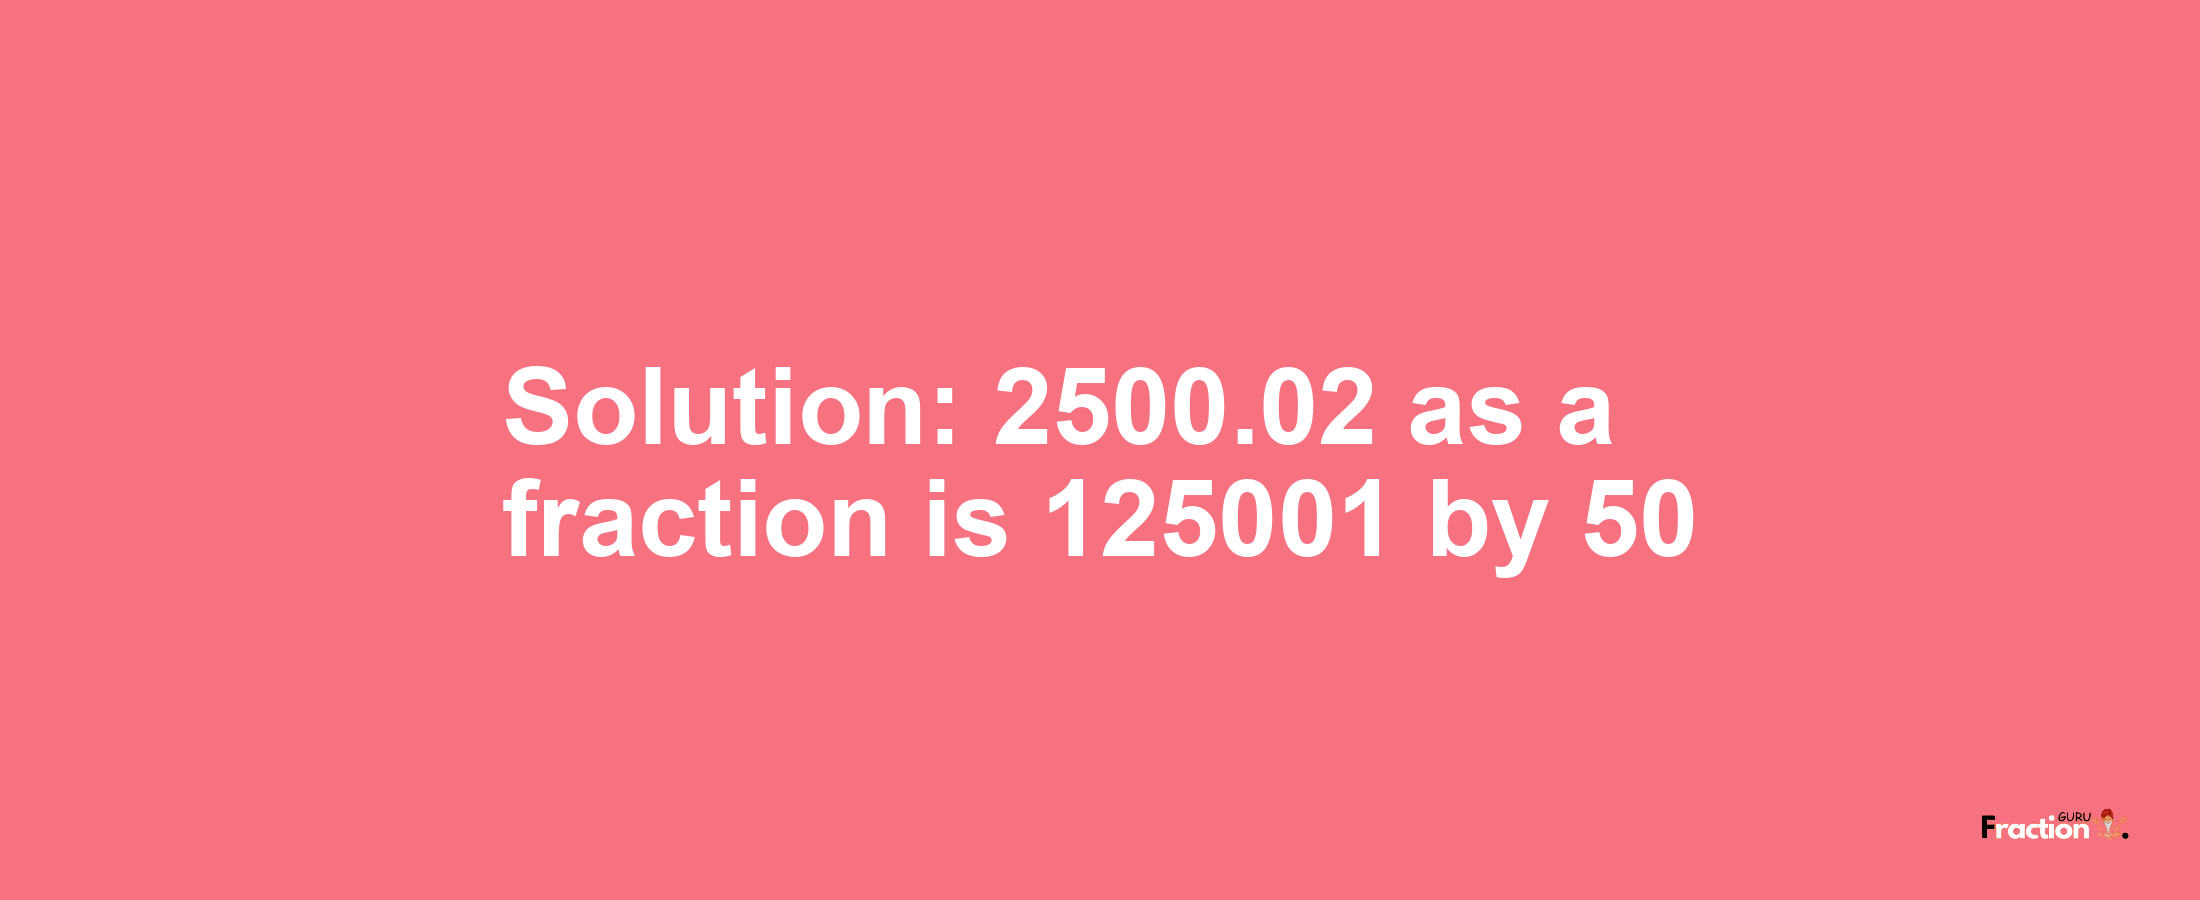 Solution:2500.02 as a fraction is 125001/50